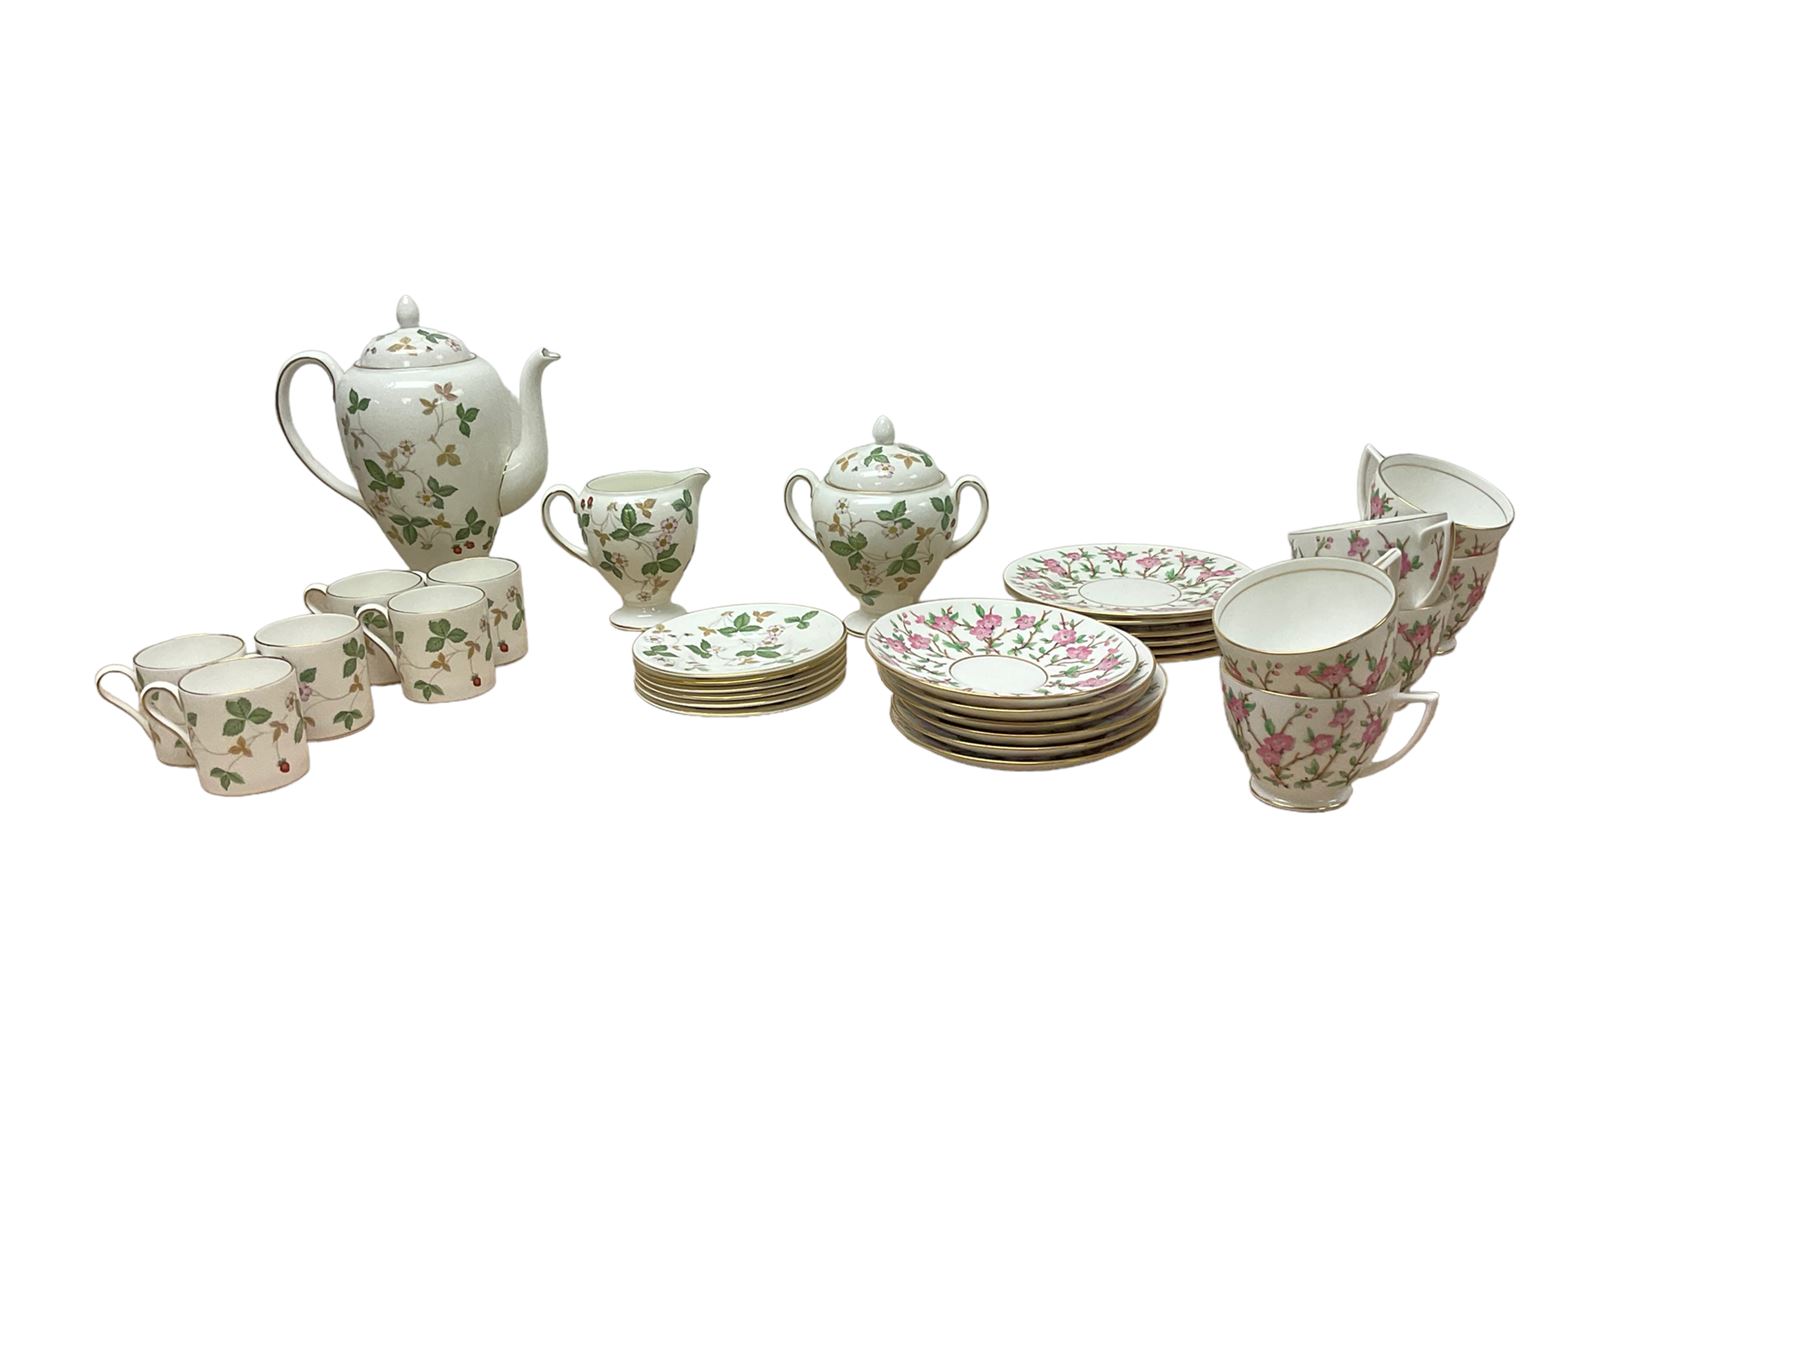 Minton tea service for six decorated with cherry blossom